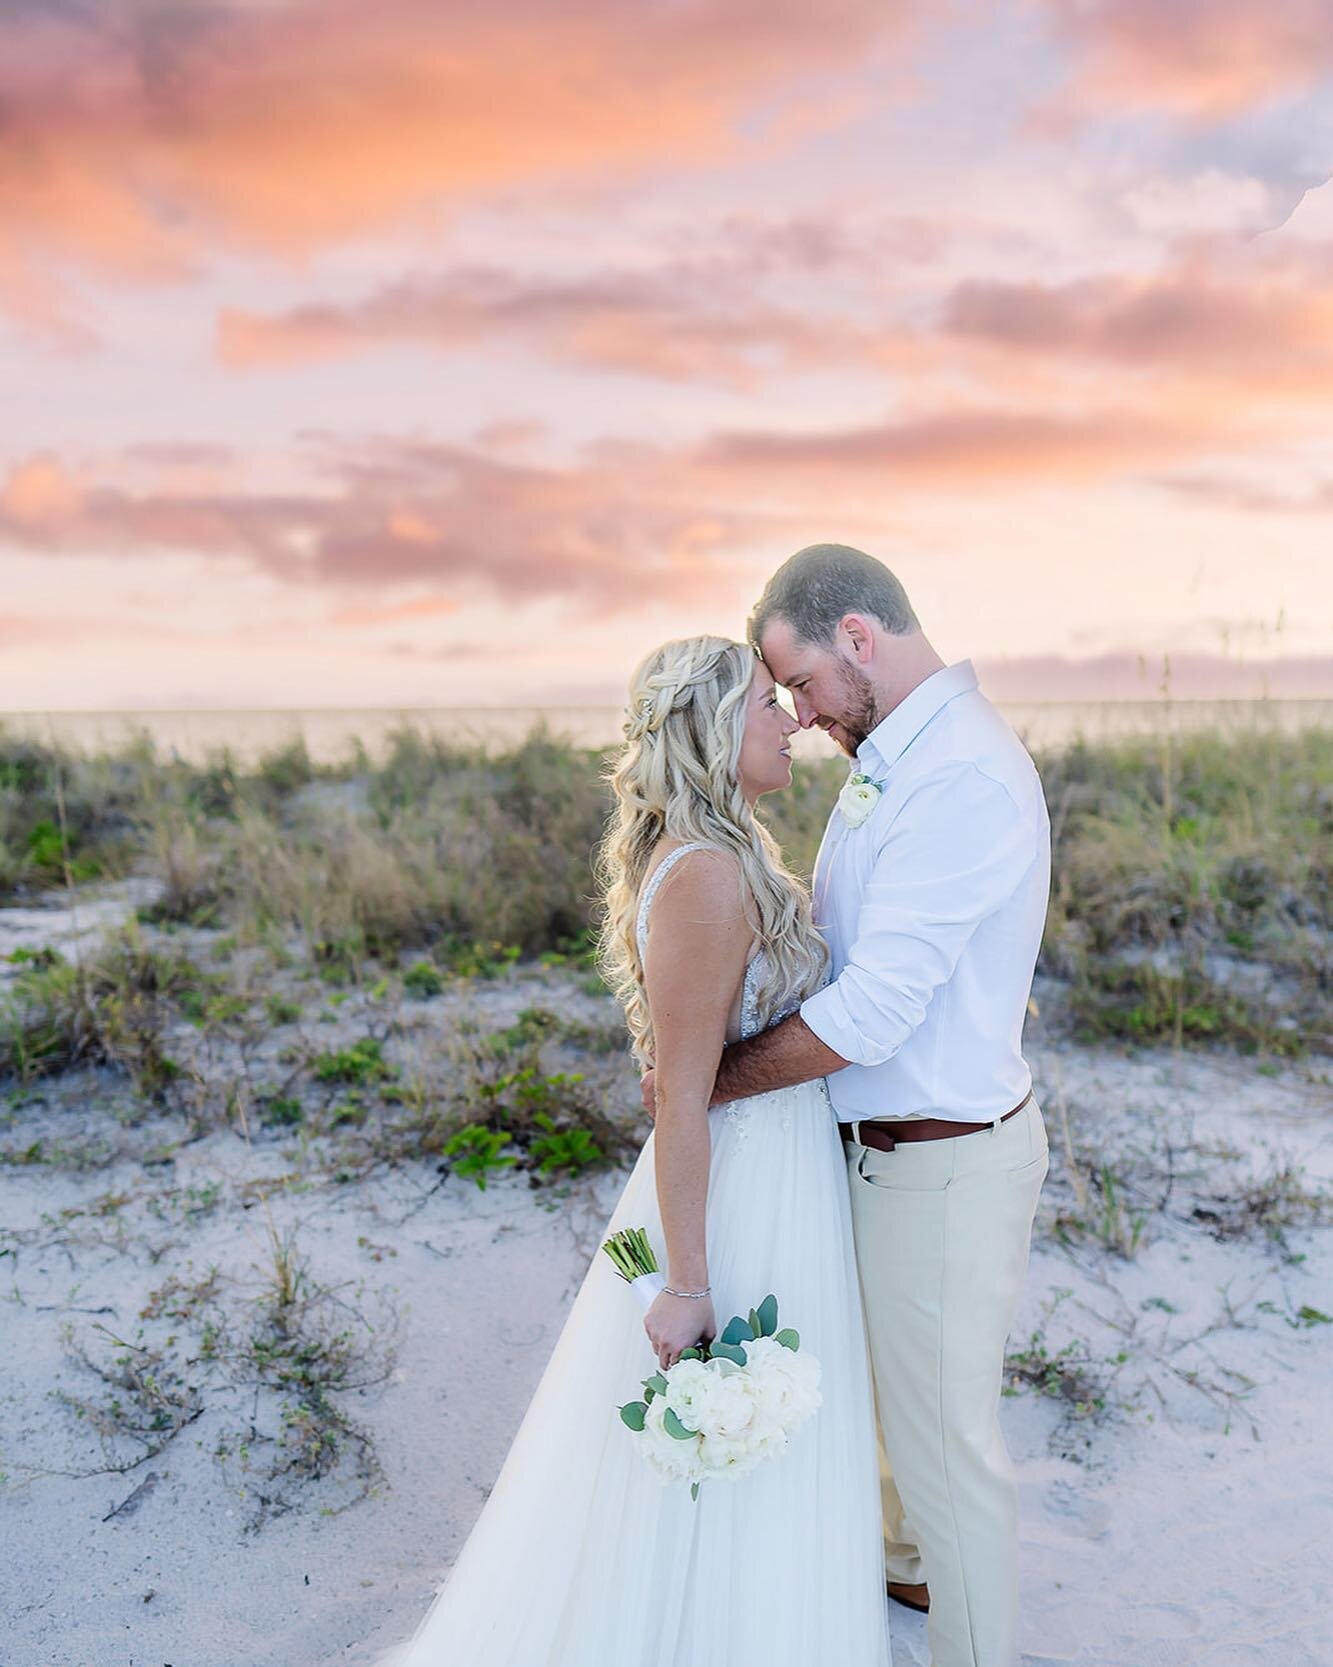 There is just something magical about beach weddings&hellip;..